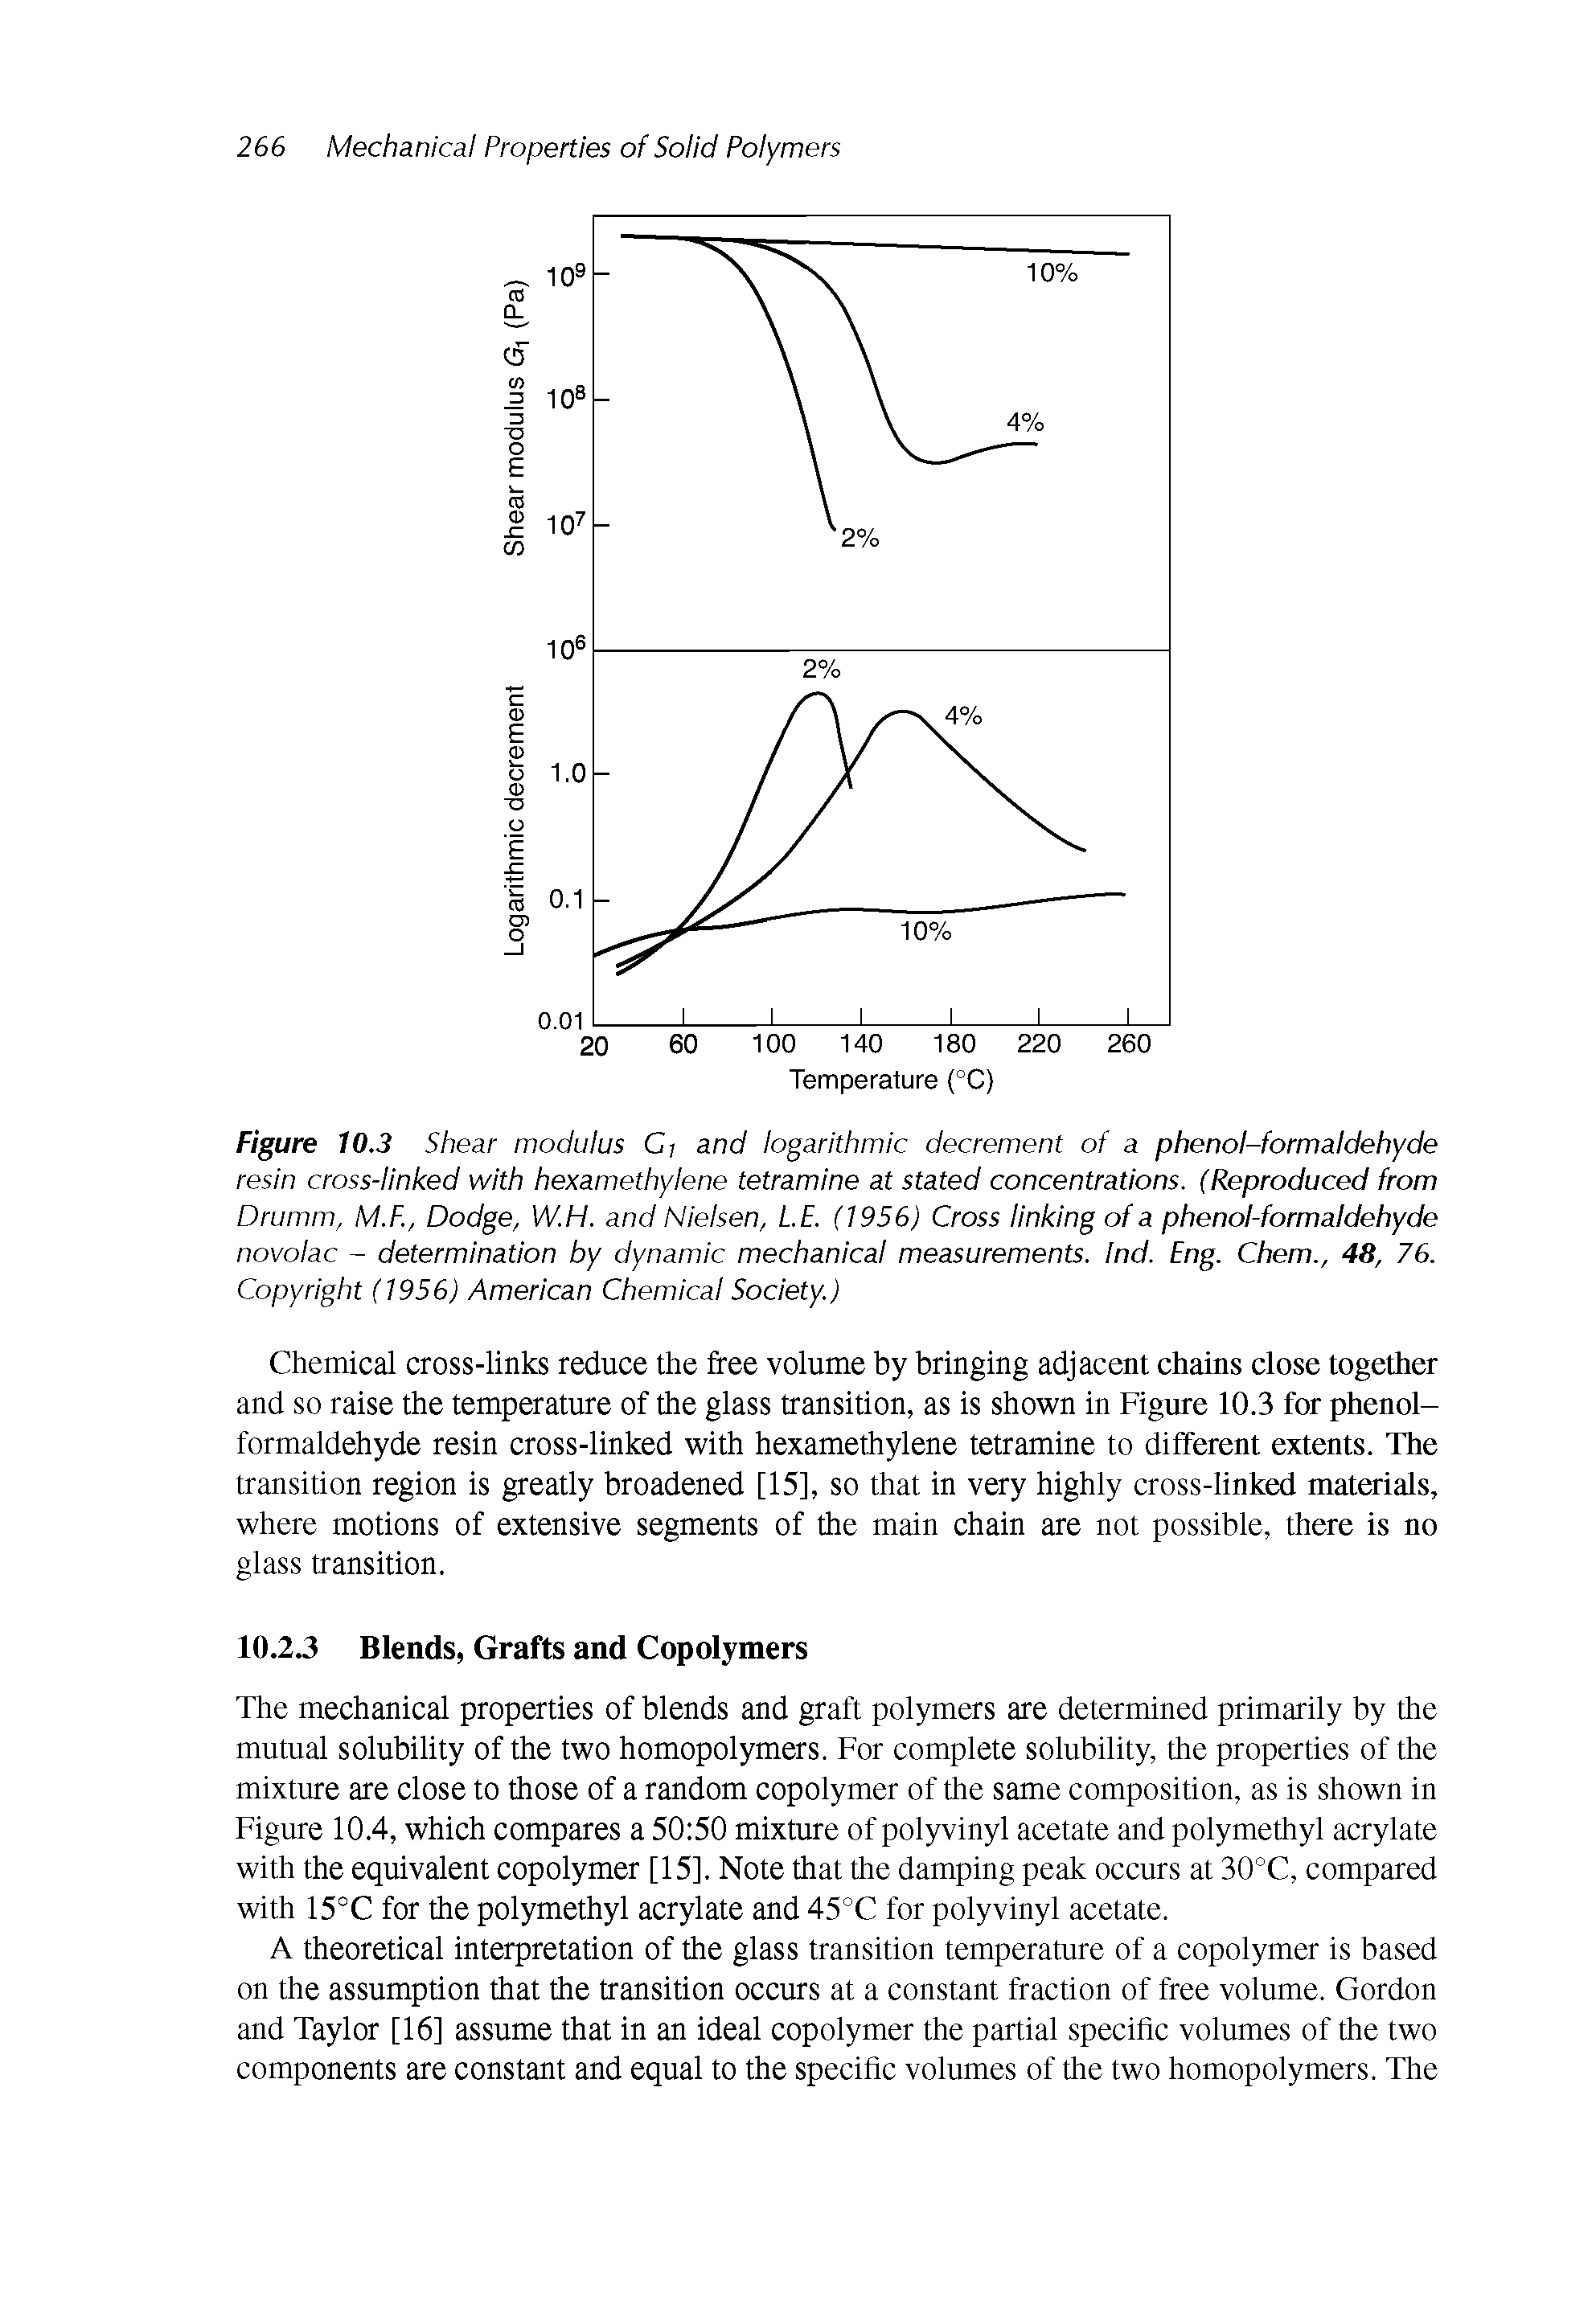 Figure 10.3 Shear modulus Cj and logarithmic decrement of a phenol-formaldehyde resin cross-linked with hexamethylene tetramine at stated concentrations. (Reproduced from Drumm, M.F., Dodge, W.H. and Nielsen, LE. (1956) Cross linking of a phenol-formaldehyde novolac - determination by dynamic mechanical measurements. Ind. Eng. Chem., 48, 76. Copyright (1956) American Chemical Society.)...